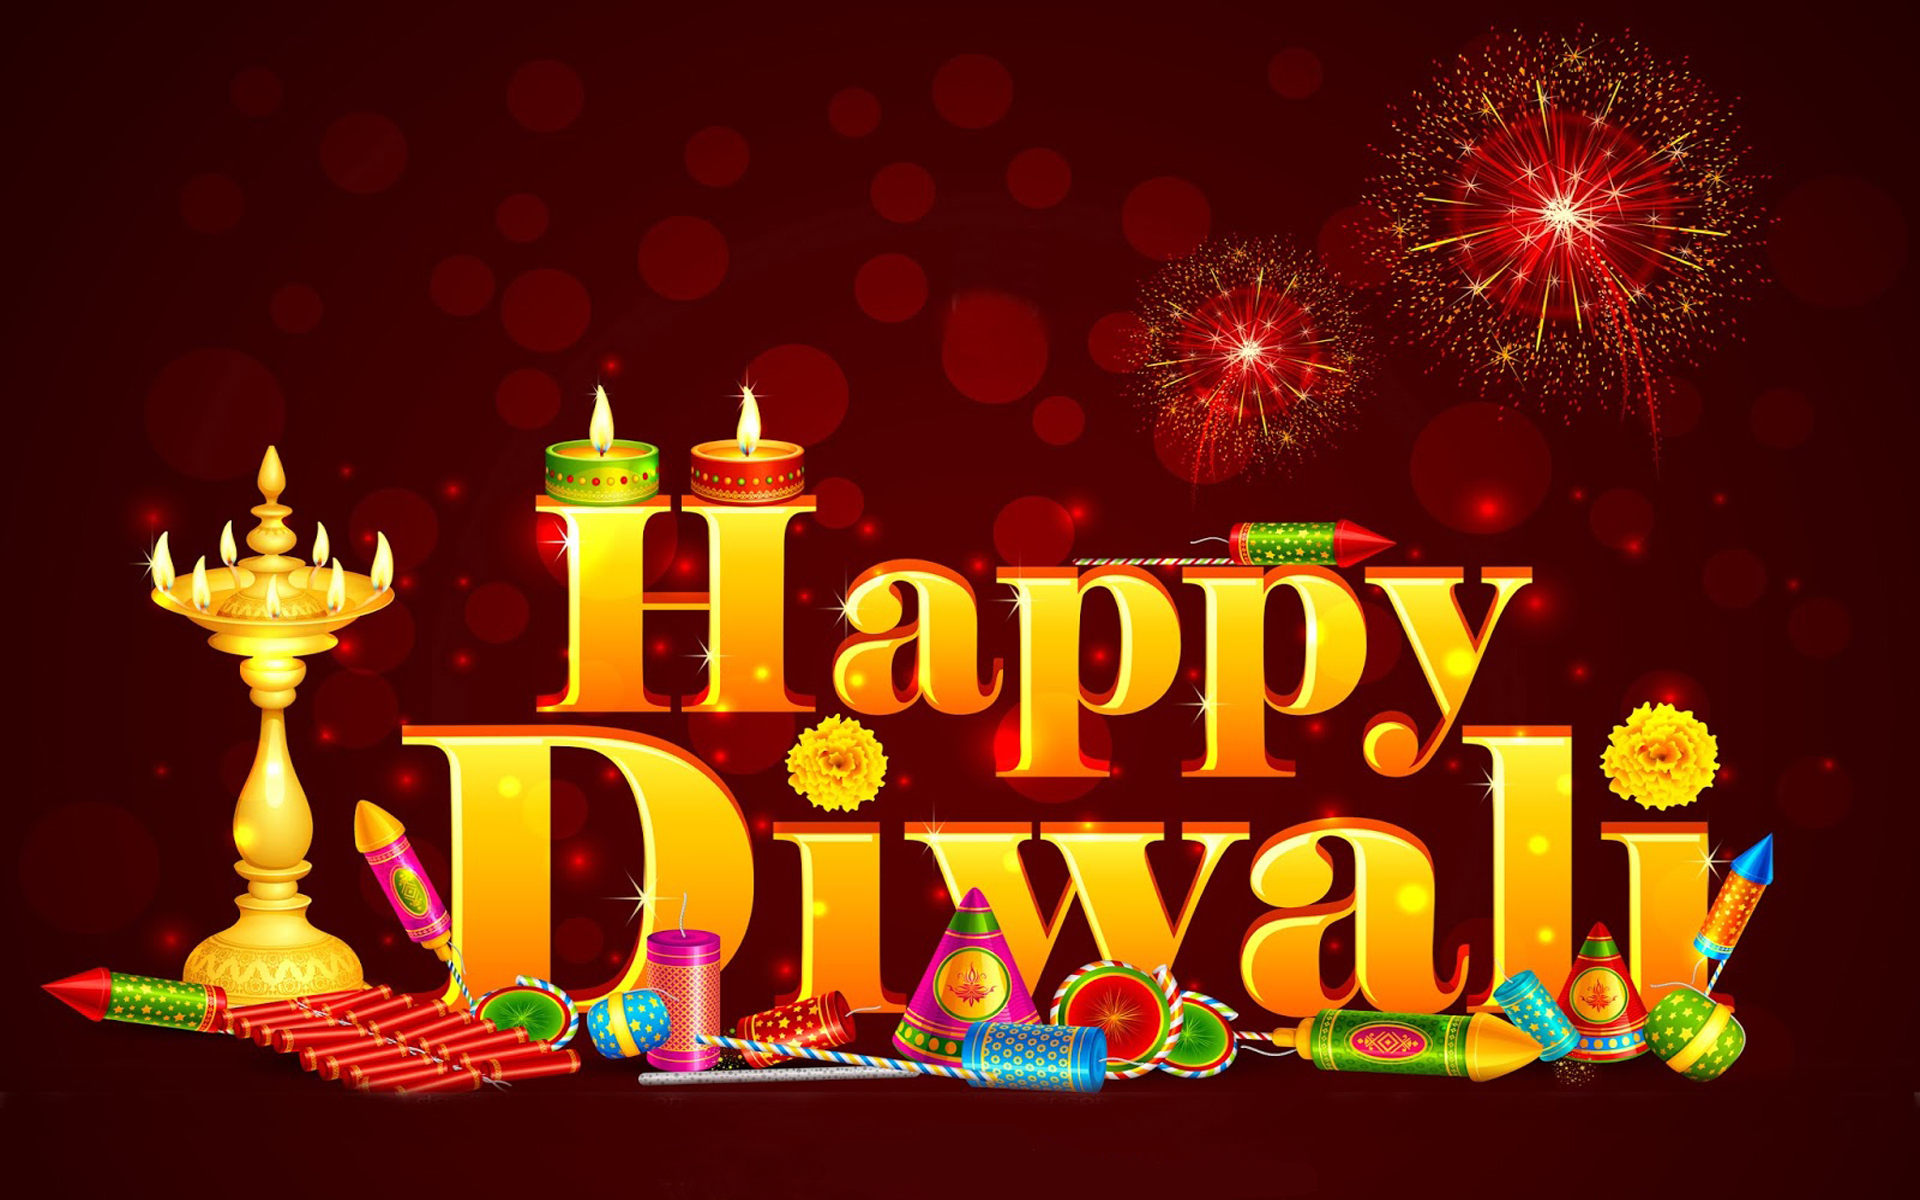 Happy Diwali Wishes Sms Messages Crackers Candles Fireworks Desktop 